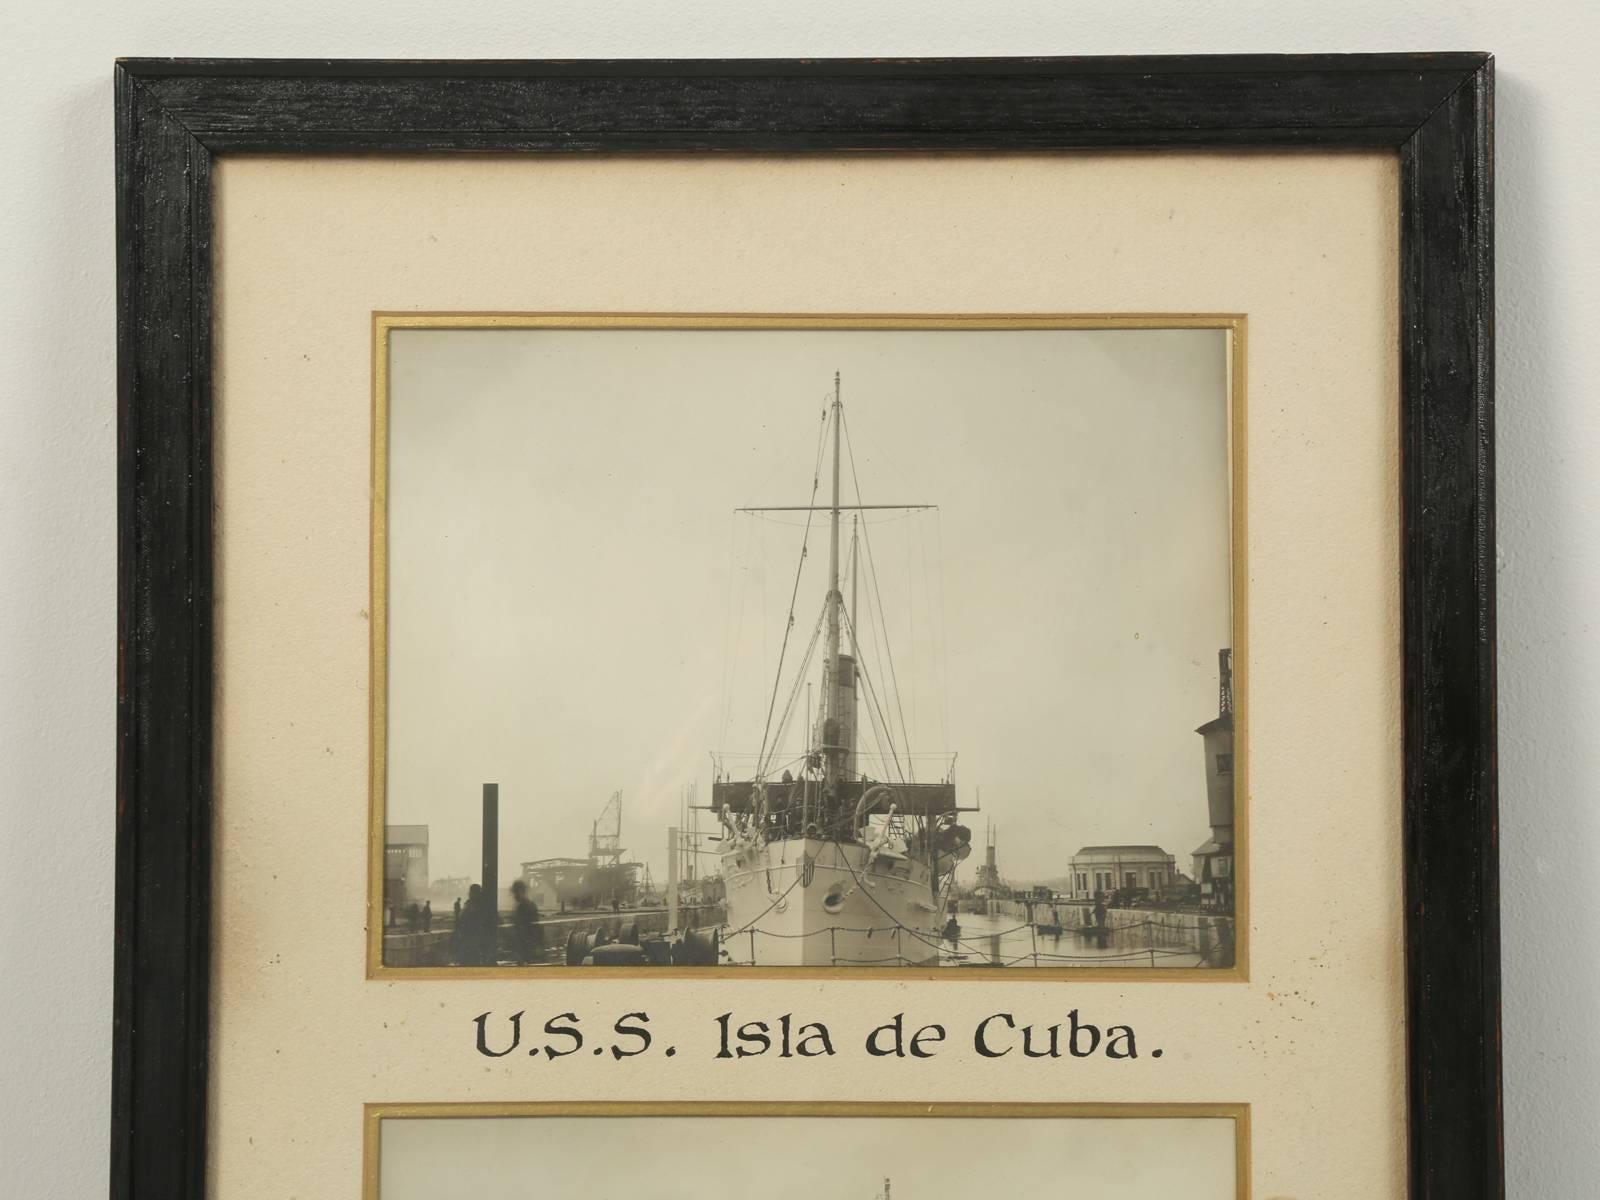 Removed to the Glenview Naval Air Station in Glenview, Illinois that closed in 1995. The USS Isla de Cuba was a former Spanish Navy cruiser, captured by and commissioned into the United States Navy as a gunboat. The warship was built in 1886–1987